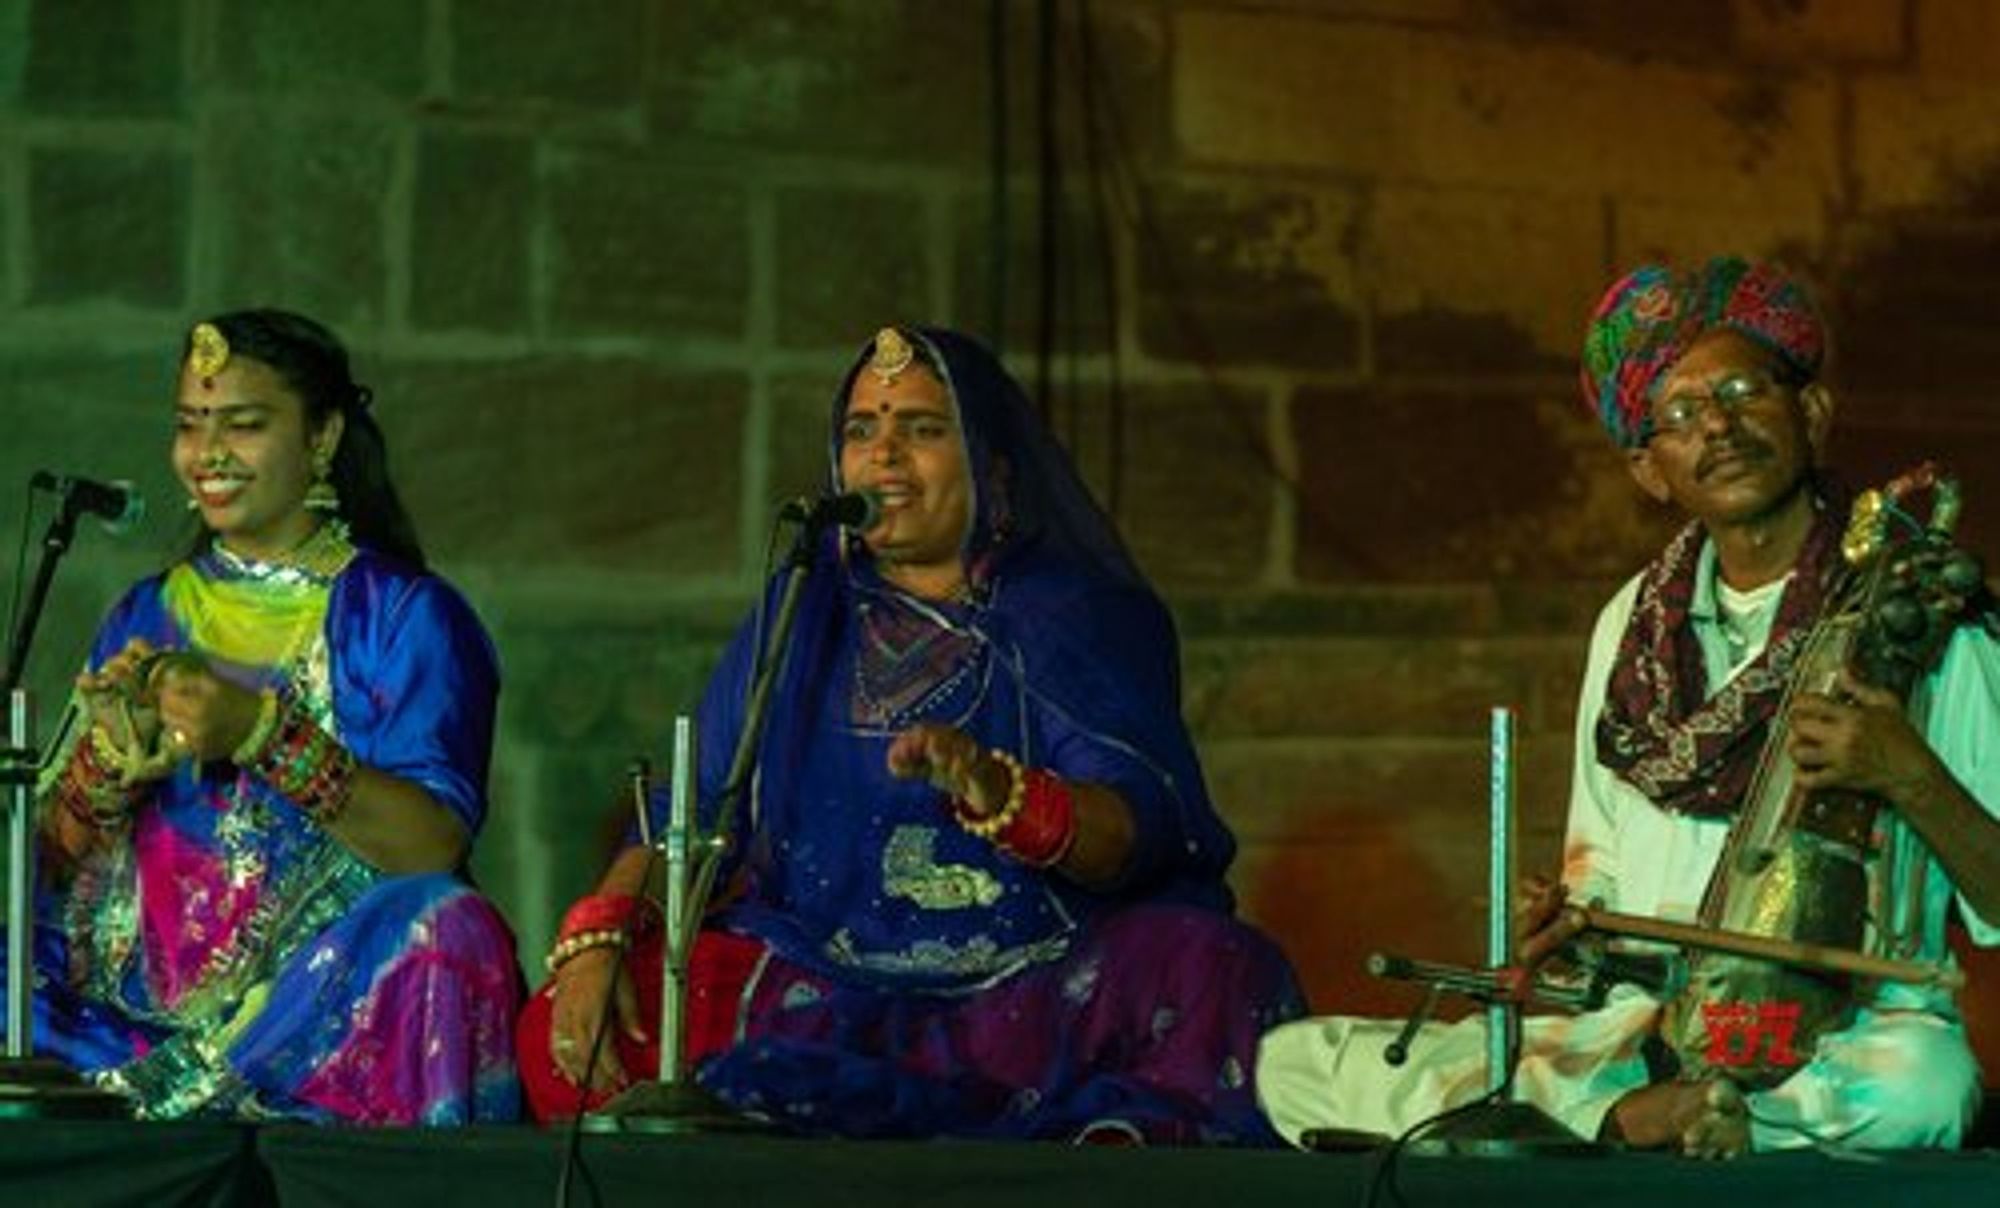 Womanly Voices (of Jodhpur Riff), three musicians sitting and playing